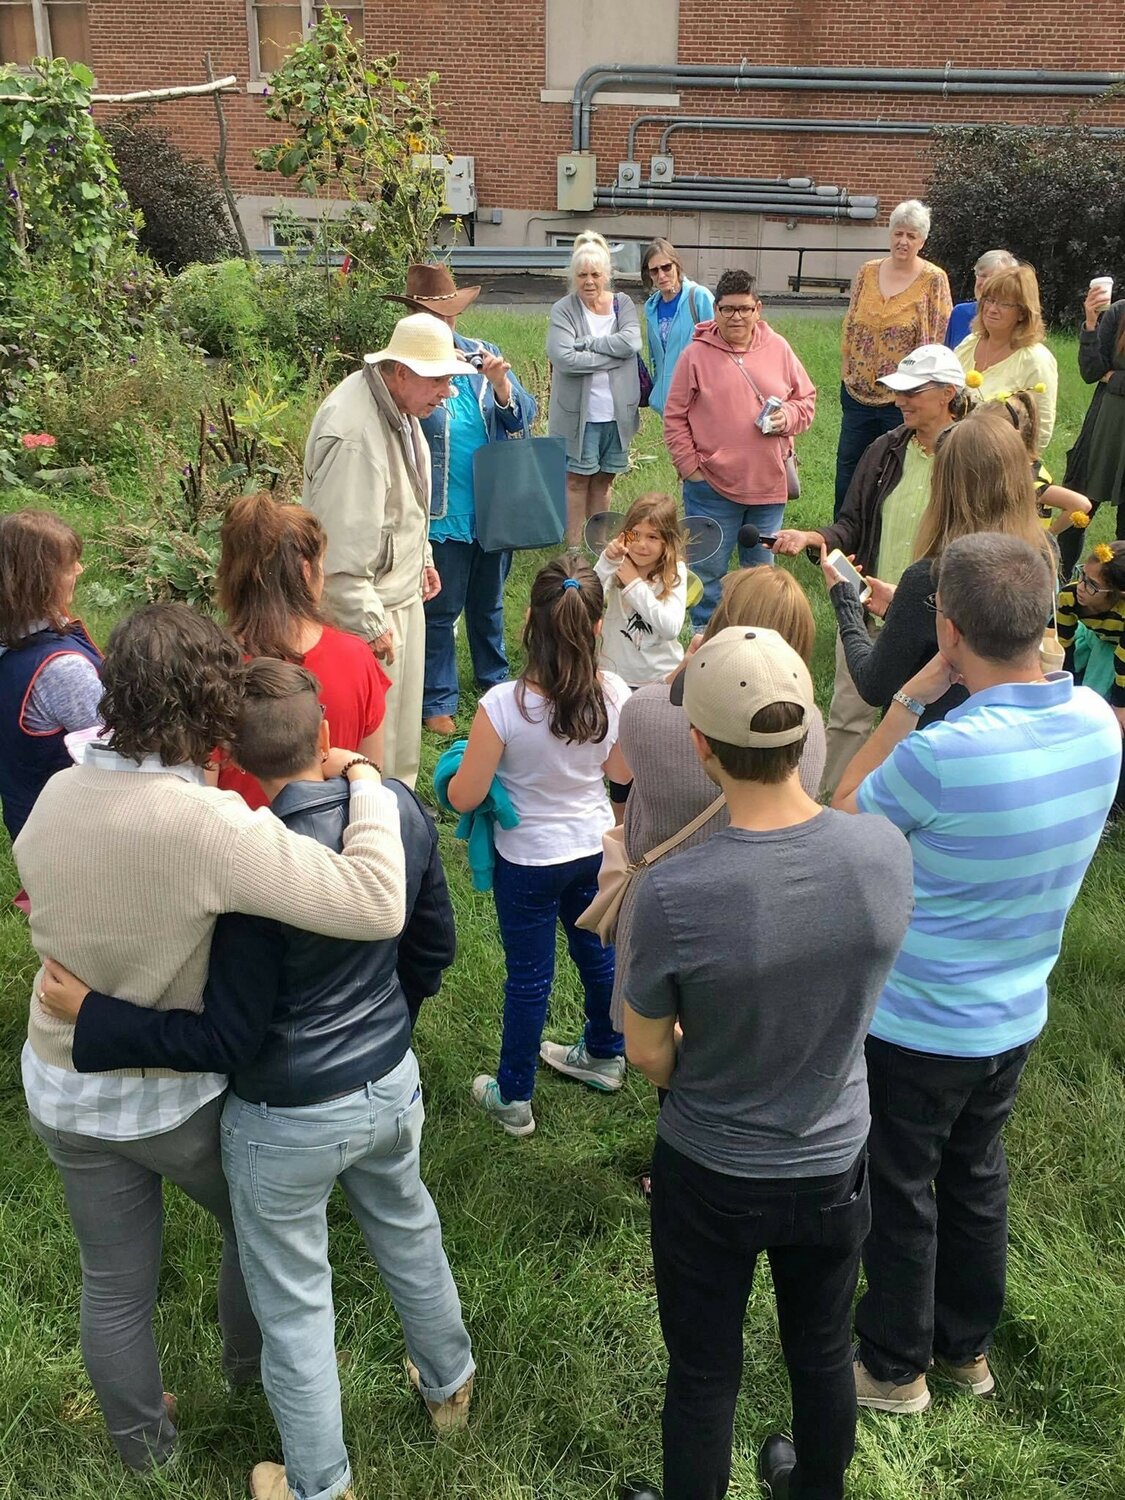 Ed Weseley, a local environmentalist, educates the public on pollinators in the Tusten Heritage Community Garden during the Narrowsburg Honeybee Festival.